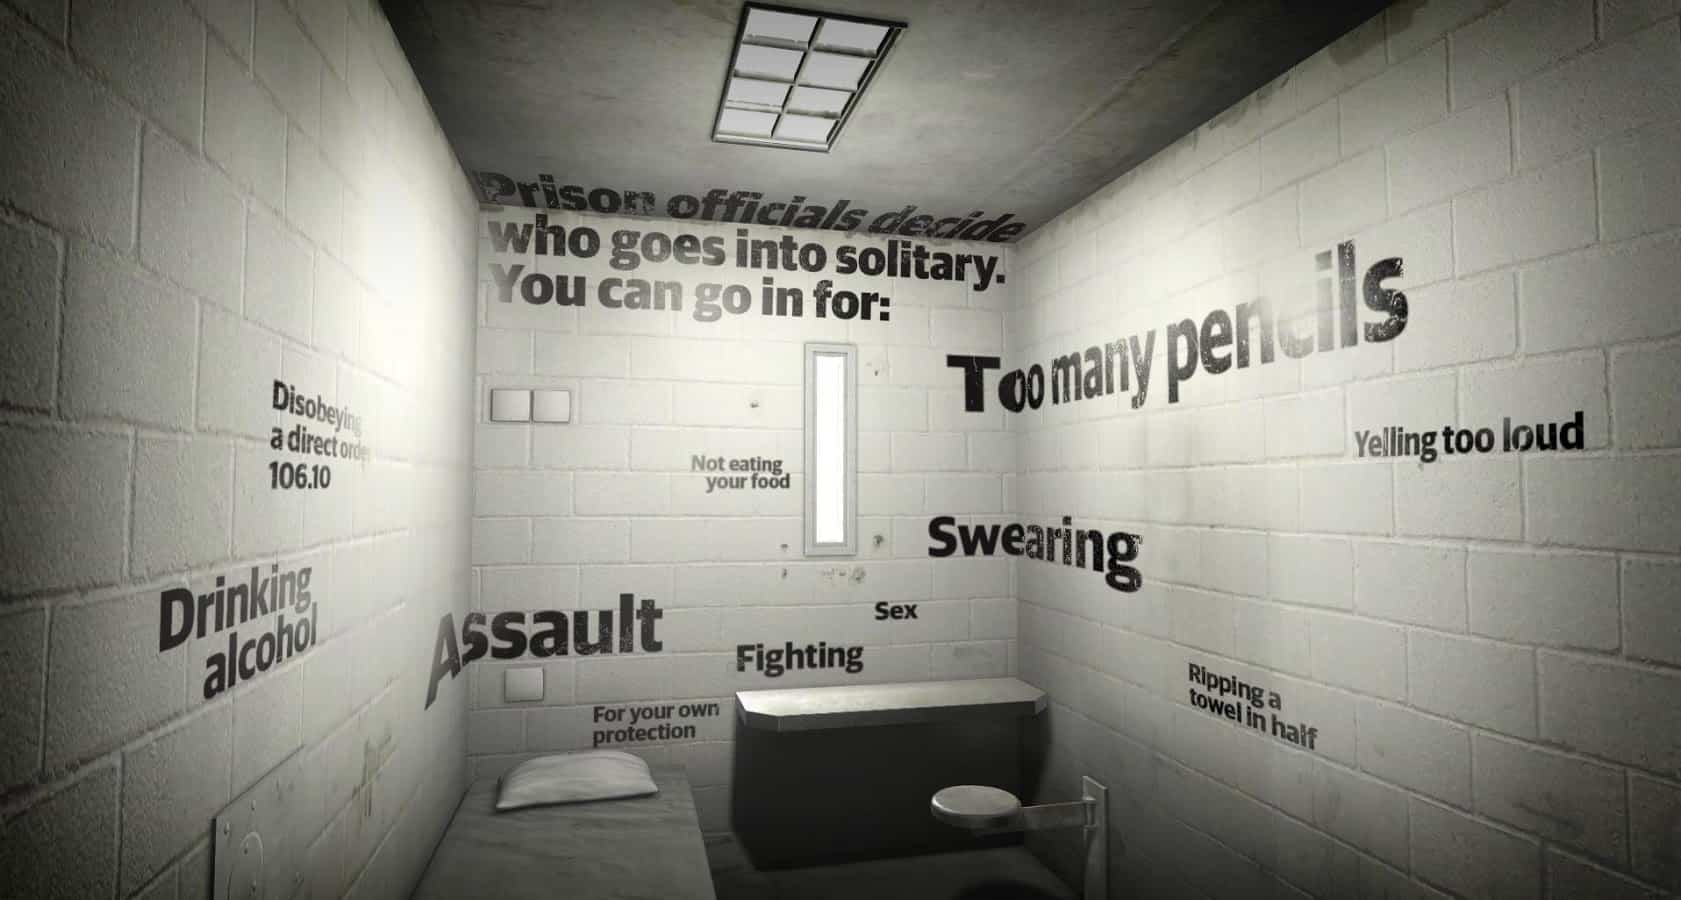 virtual solitary confinement